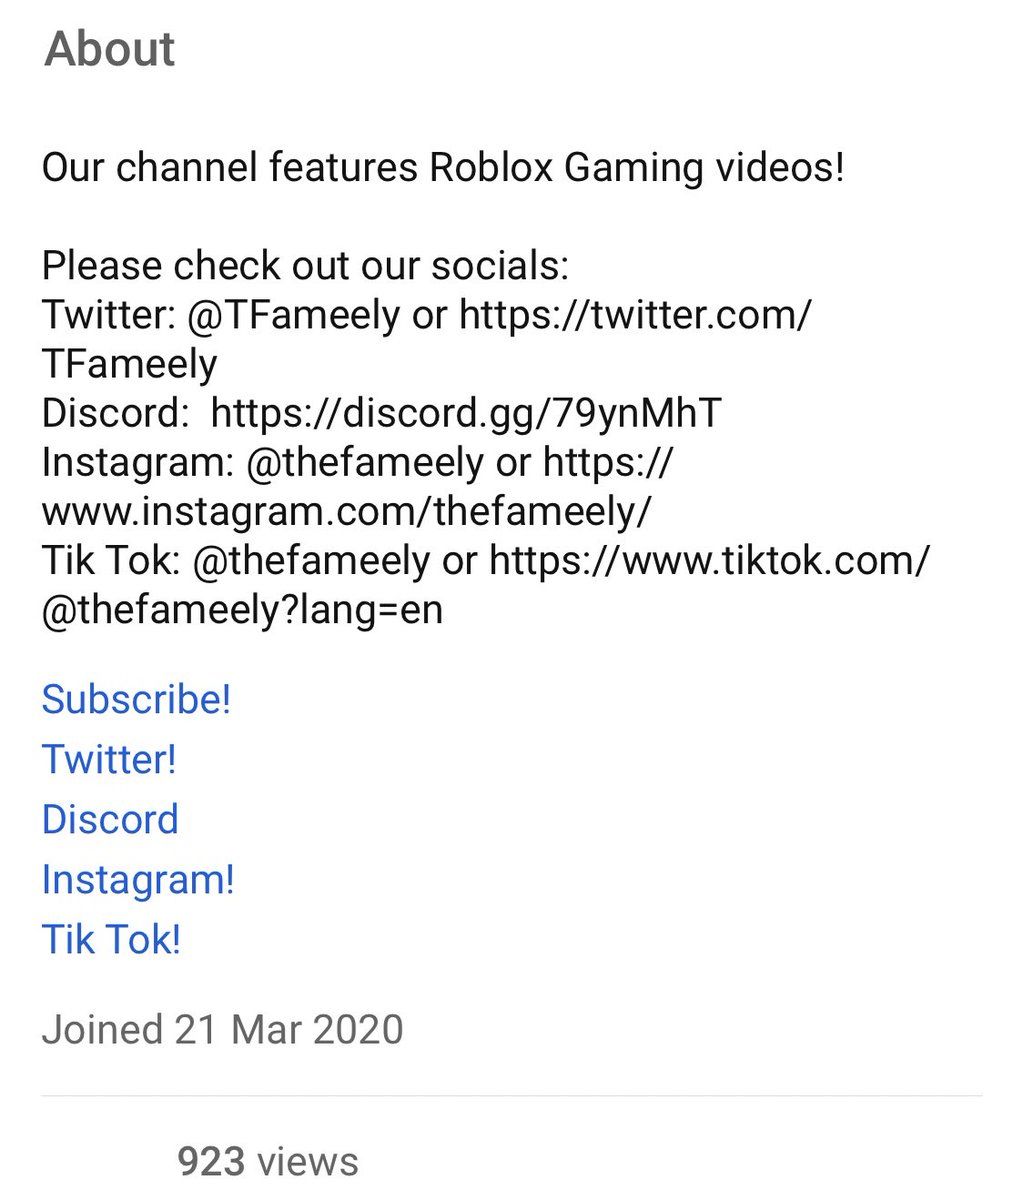 The Fameely On Twitter It S Our Channel S Birthday Youtube Game Gamedev Covidiots Covid19 Video Covid Spring Corona Wdsd Wdsd2021 Lockdown2021 Youtuber Penthouse2ep10 Roblox Sundayvibes Https T Co Ot546ikf8i - roblox youtubers discord